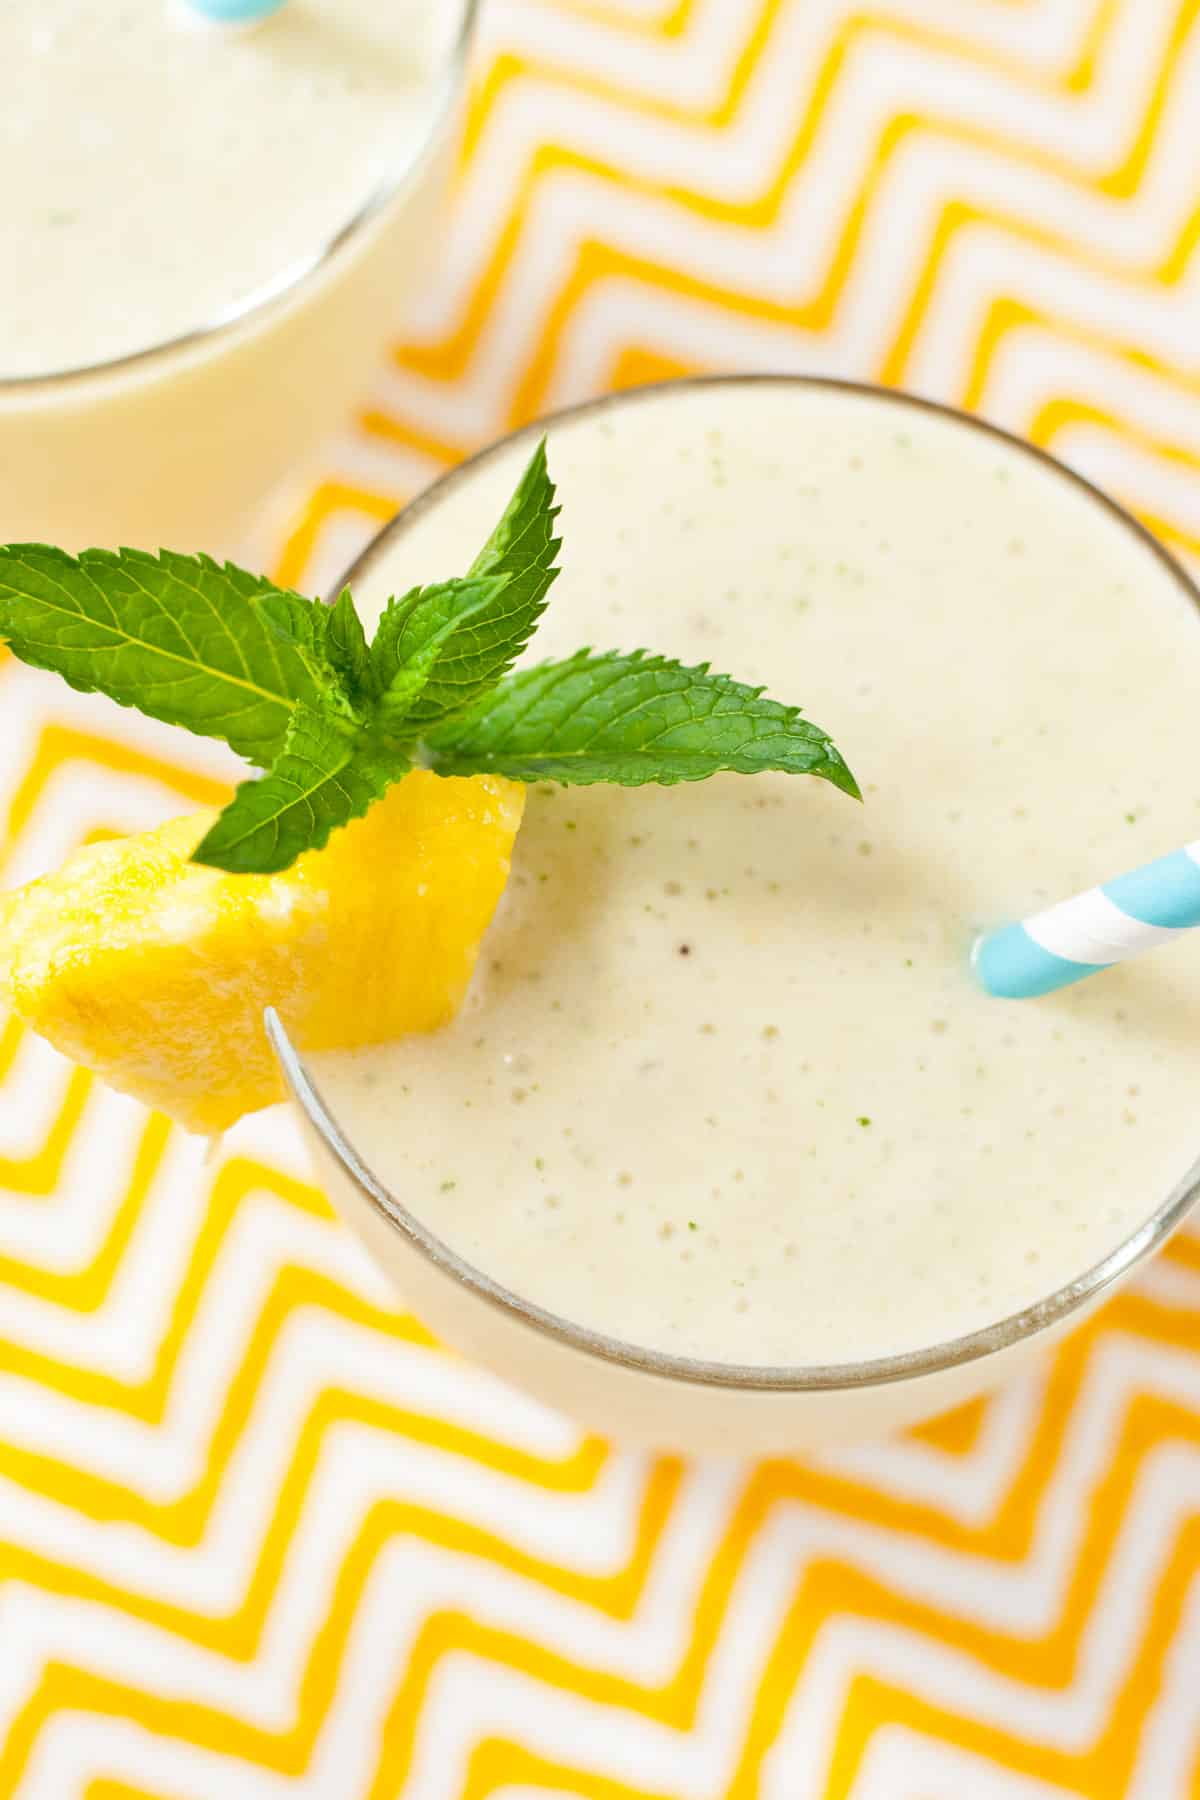 Smoothie in a glass garnished with a piece of pineapple and mint.